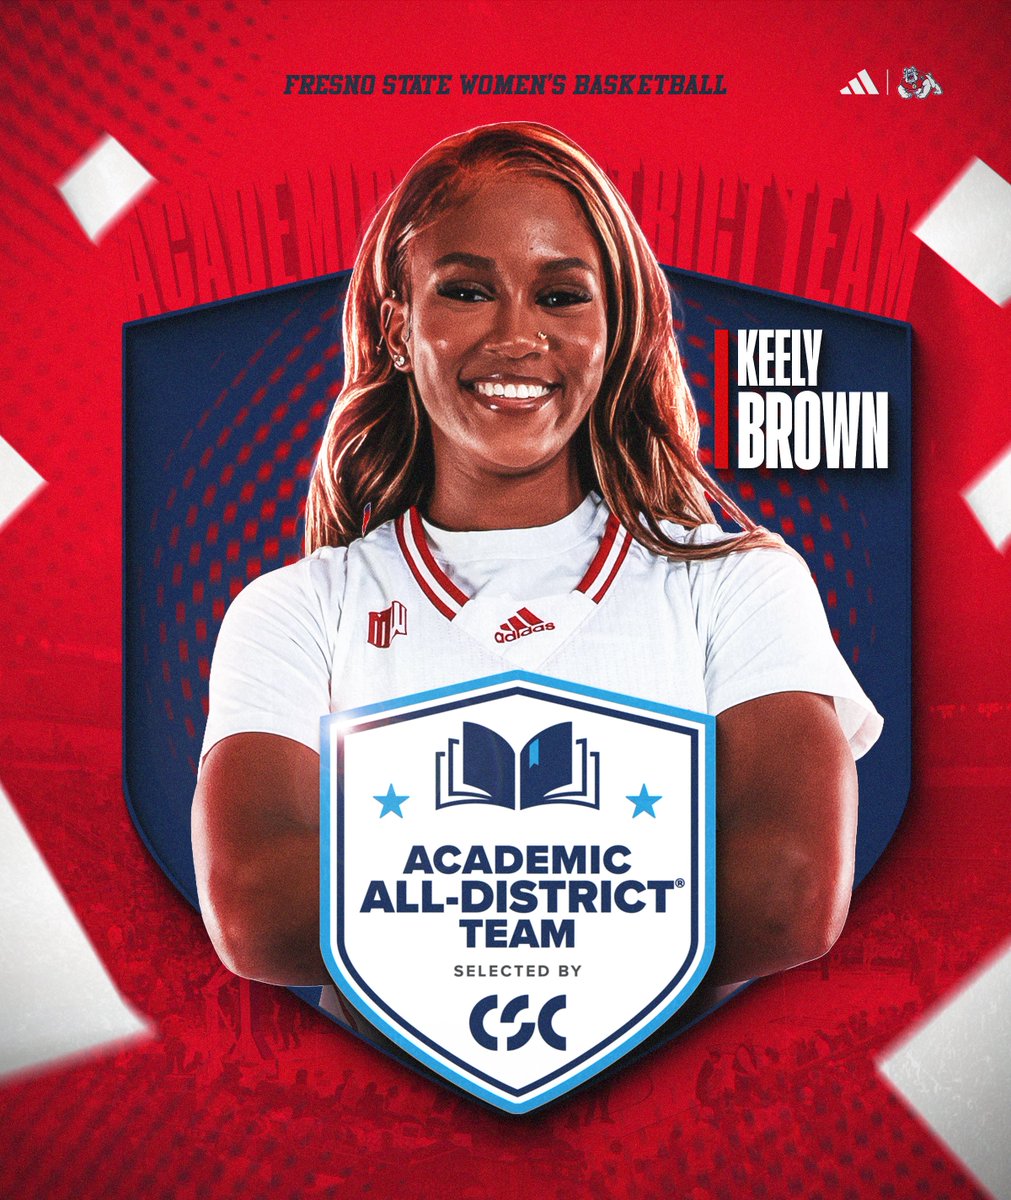 Congratulations to Keely Brown on being named to @AcadAllAmerica 's Academic All-District Team 📚 📰: tinyurl.com/56jw986c